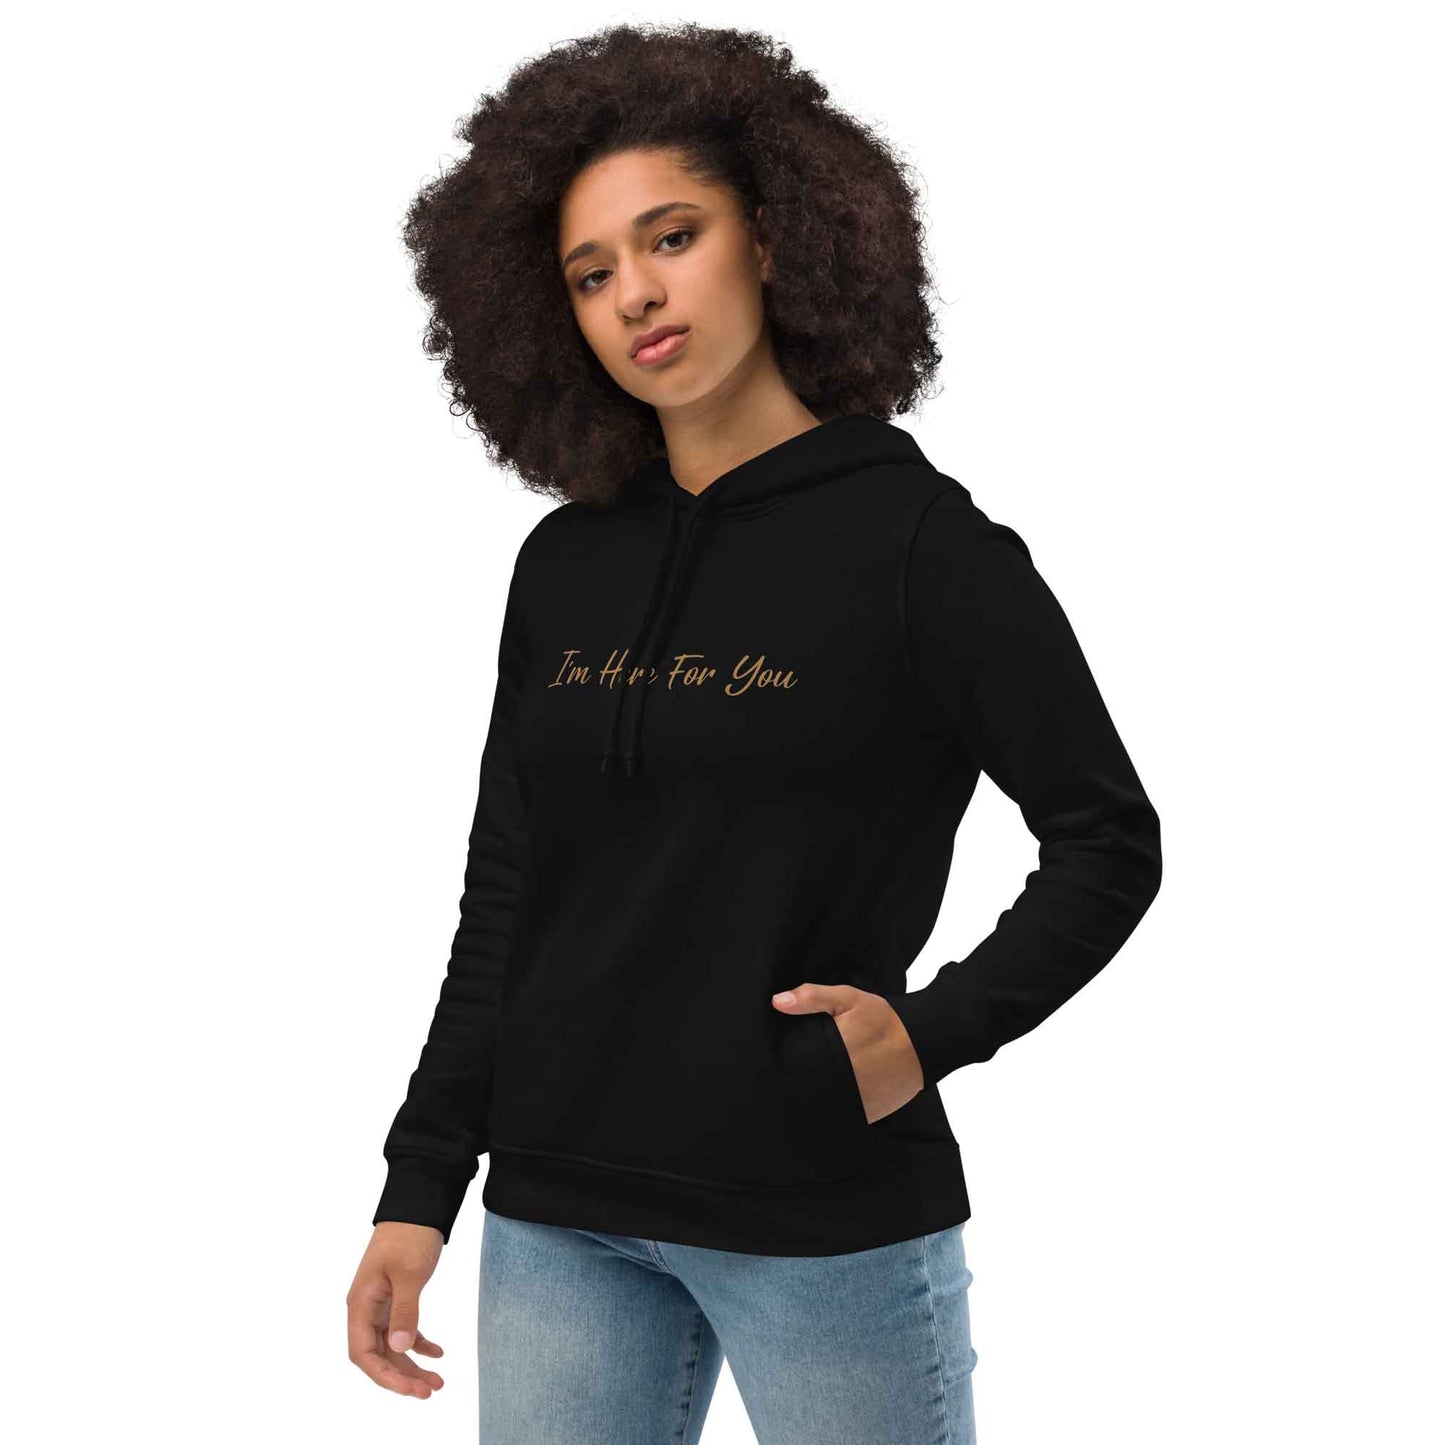 Women black motivational hoodie with inspirational quote, "I'm Here For You."